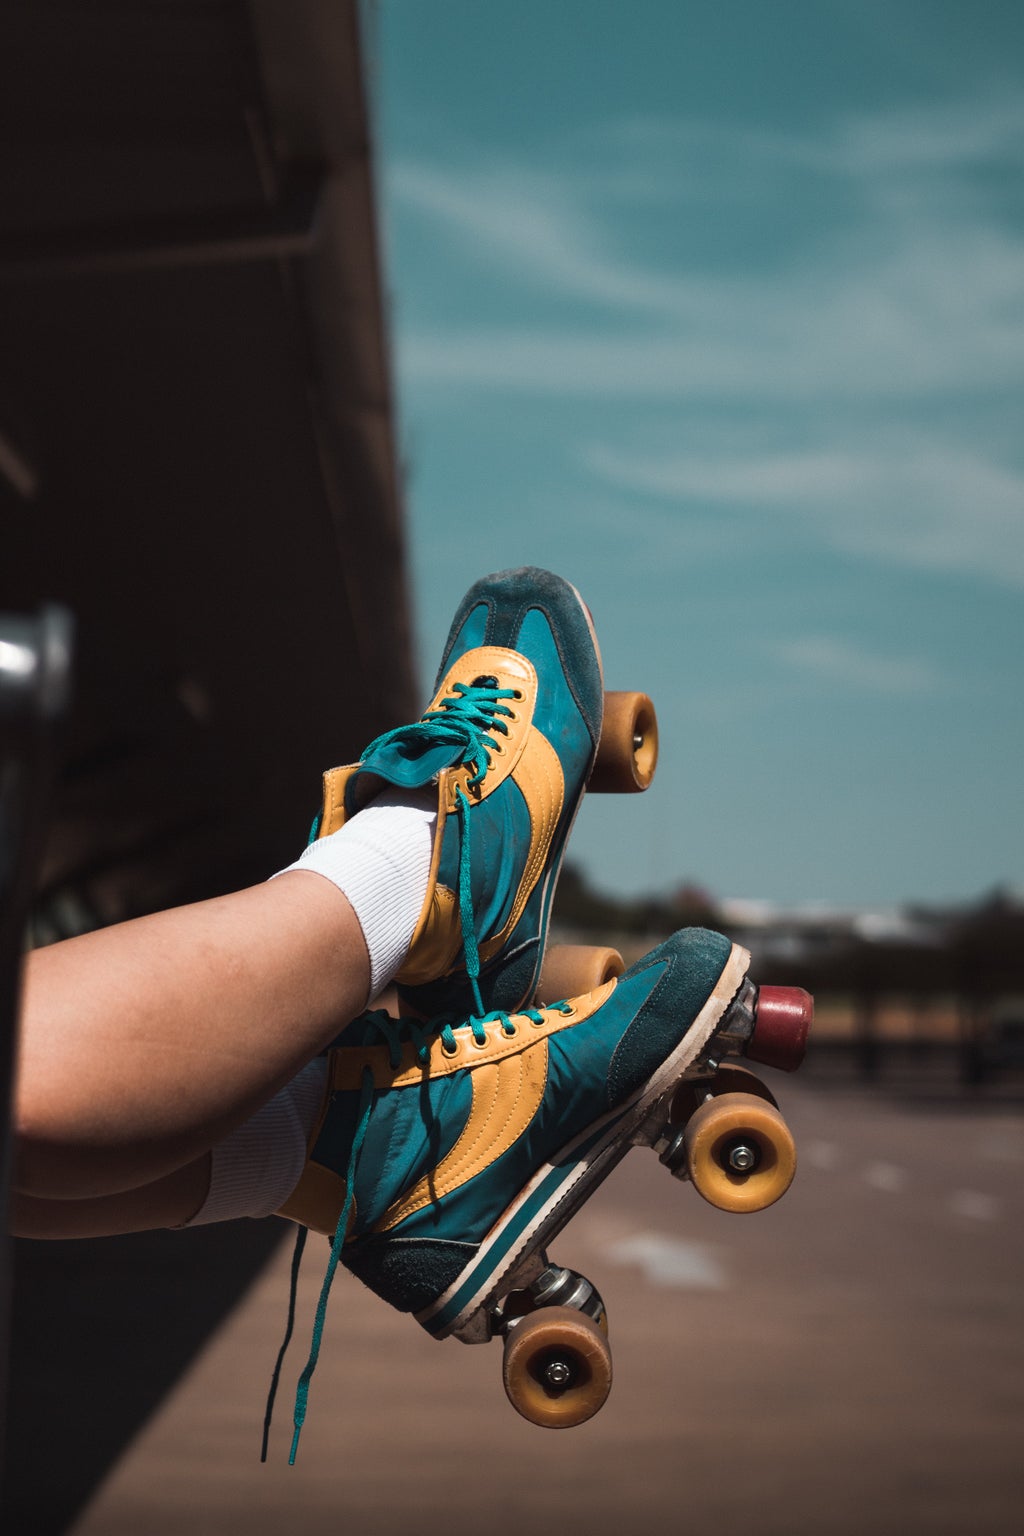 close up shot of a person wearing roller skates